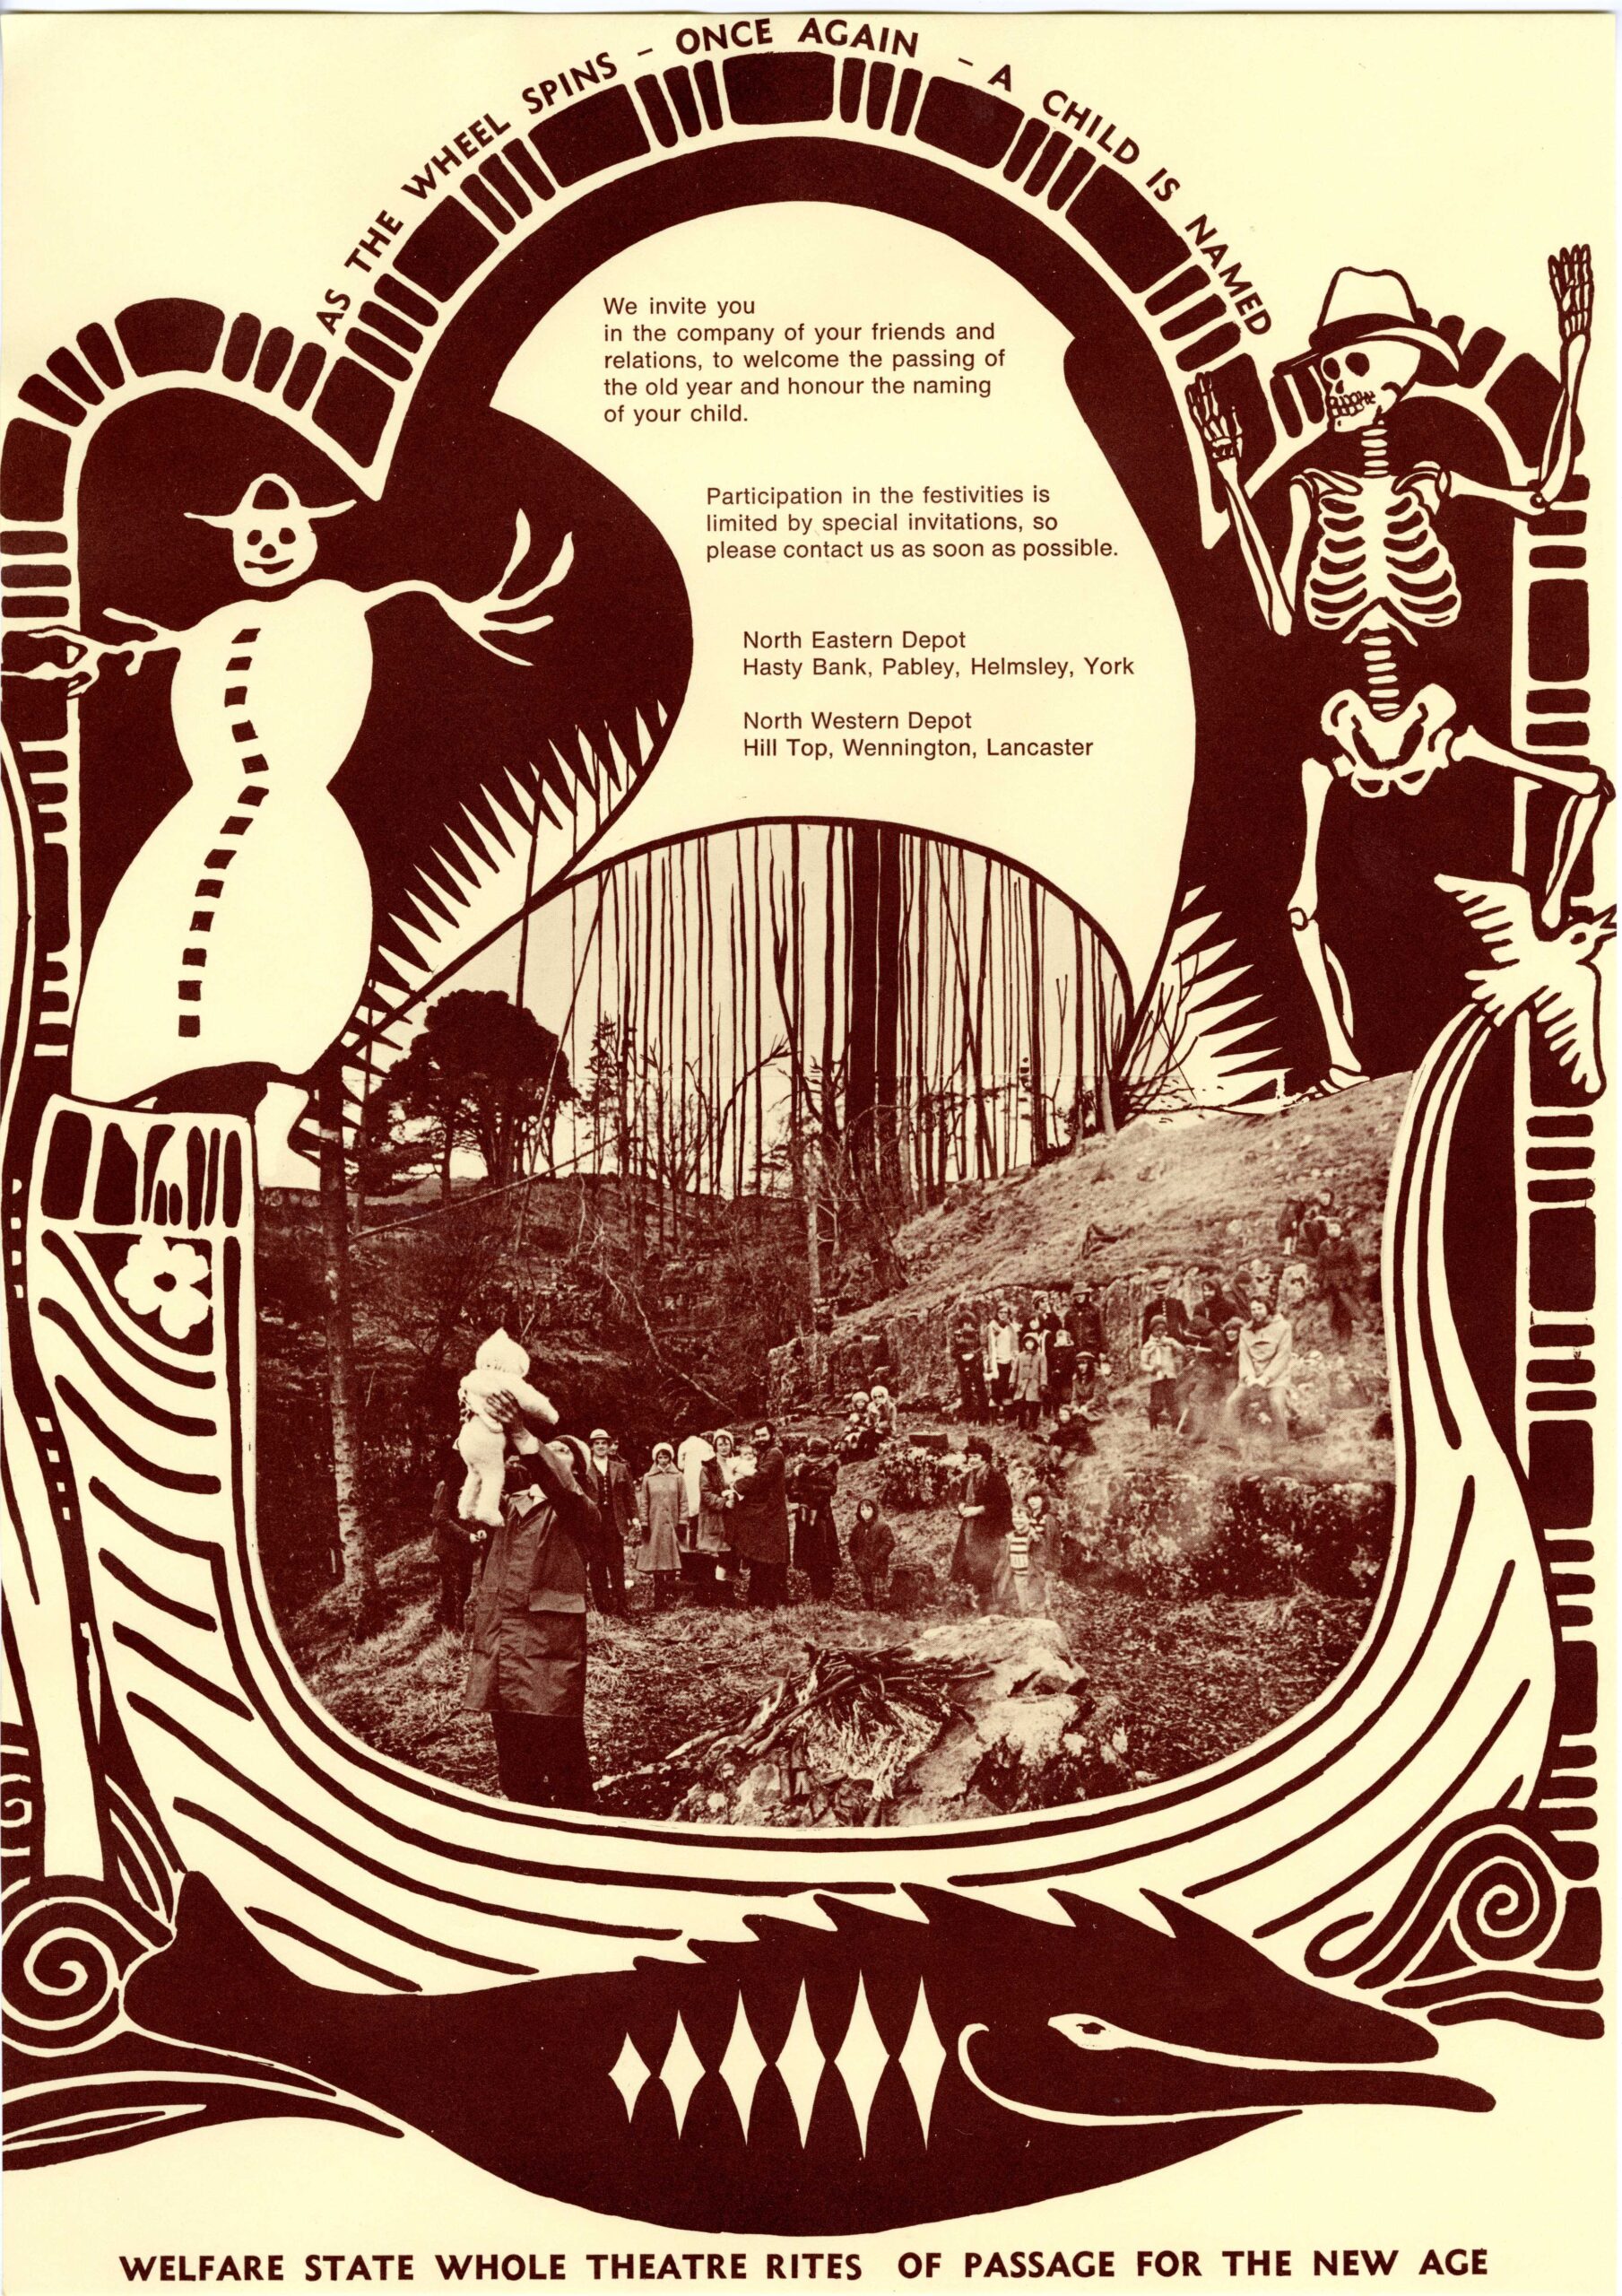 The radical artists collective, Welfare State International, sought to offer art for all on the same basis as education and health as being essential to wellbeing. Part of their practice involved pioneering secular ceremonies as illustrated by this poster.